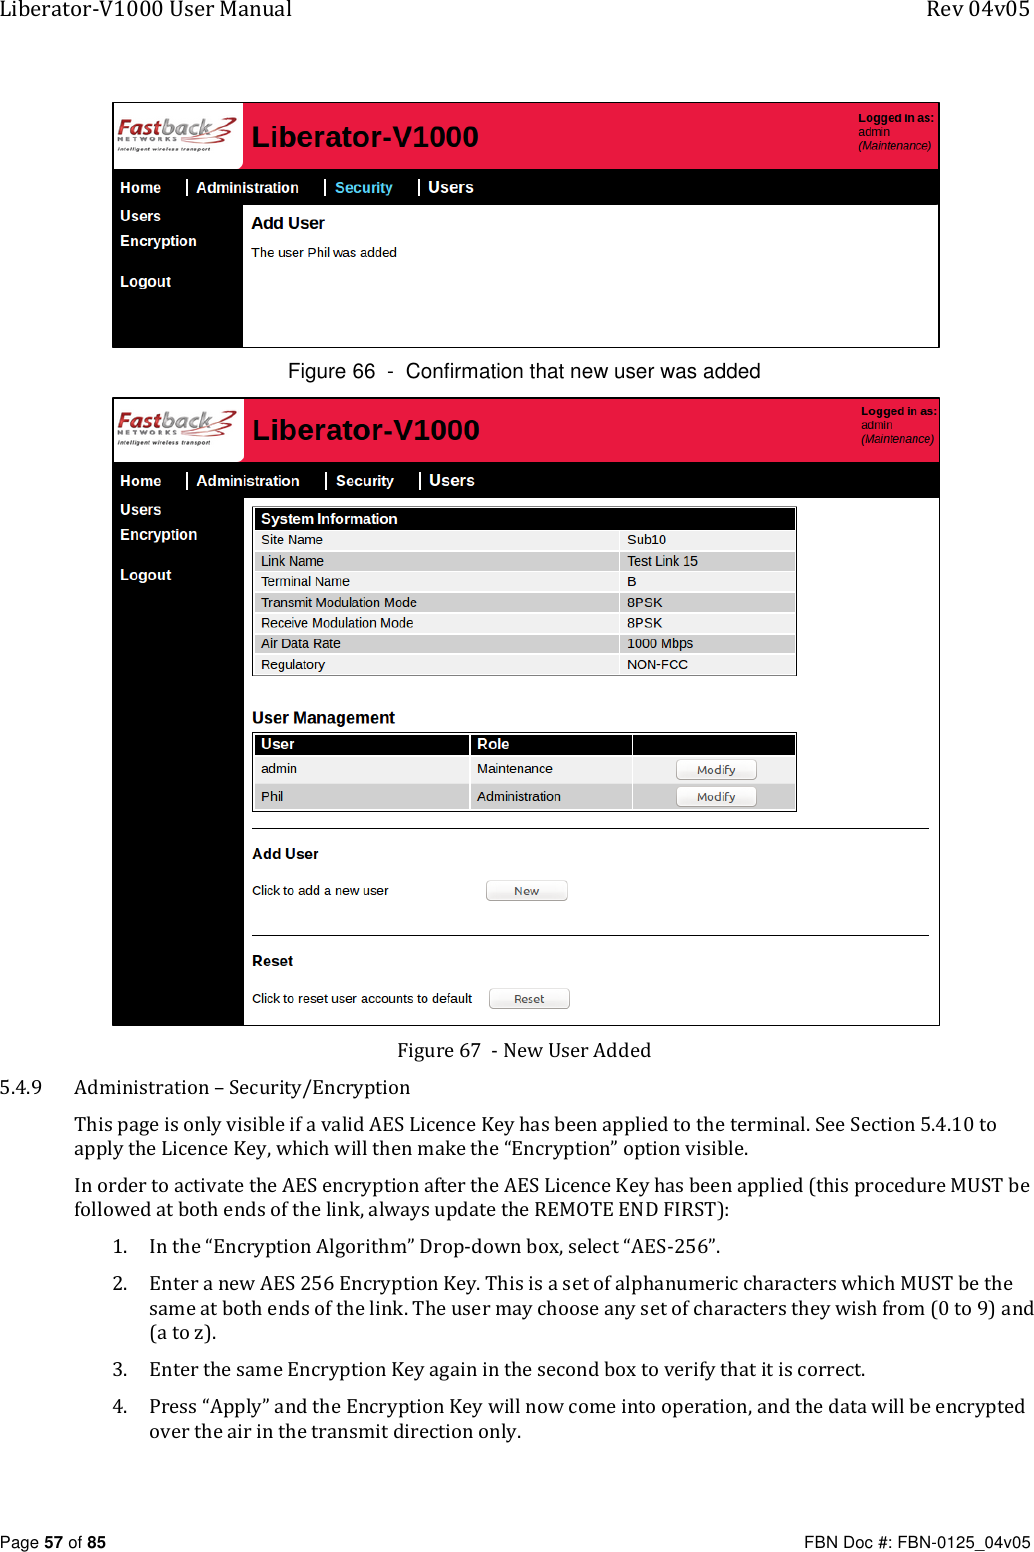 Liberator-V1000 User Manual  Rev 04v05     Page 57 of 85   FBN Doc #: FBN-0125_04v05  Figure 66  -  Confirmation that new user was added  Figure 67  - New User Added 5.4.9 Administration – Security/Encryption This page is only visible if a valid AES Licence Key has been applied to the terminal. See Section 5.4.10 to apply the Licence Key, which will then make the “Encryption” option visible. In order to activate the AES encryption after the AES Licence Key has been applied (this procedure MUST be followed at both ends of the link, always update the REMOTE END FIRST): 1. In the “Encryption Algorithm” Drop-down box, select “AES-256”.  2. Enter a new AES 256 Encryption Key. This is a set of alphanumeric characters which MUST be the same at both ends of the link. The user may choose any set of characters they wish from (0 to 9) and (a to z). 3. Enter the same Encryption Key again in the second box to verify that it is correct. 4. Press “Apply” and the Encryption Key will now come into operation, and the data will be encrypted over the air in the transmit direction only. 